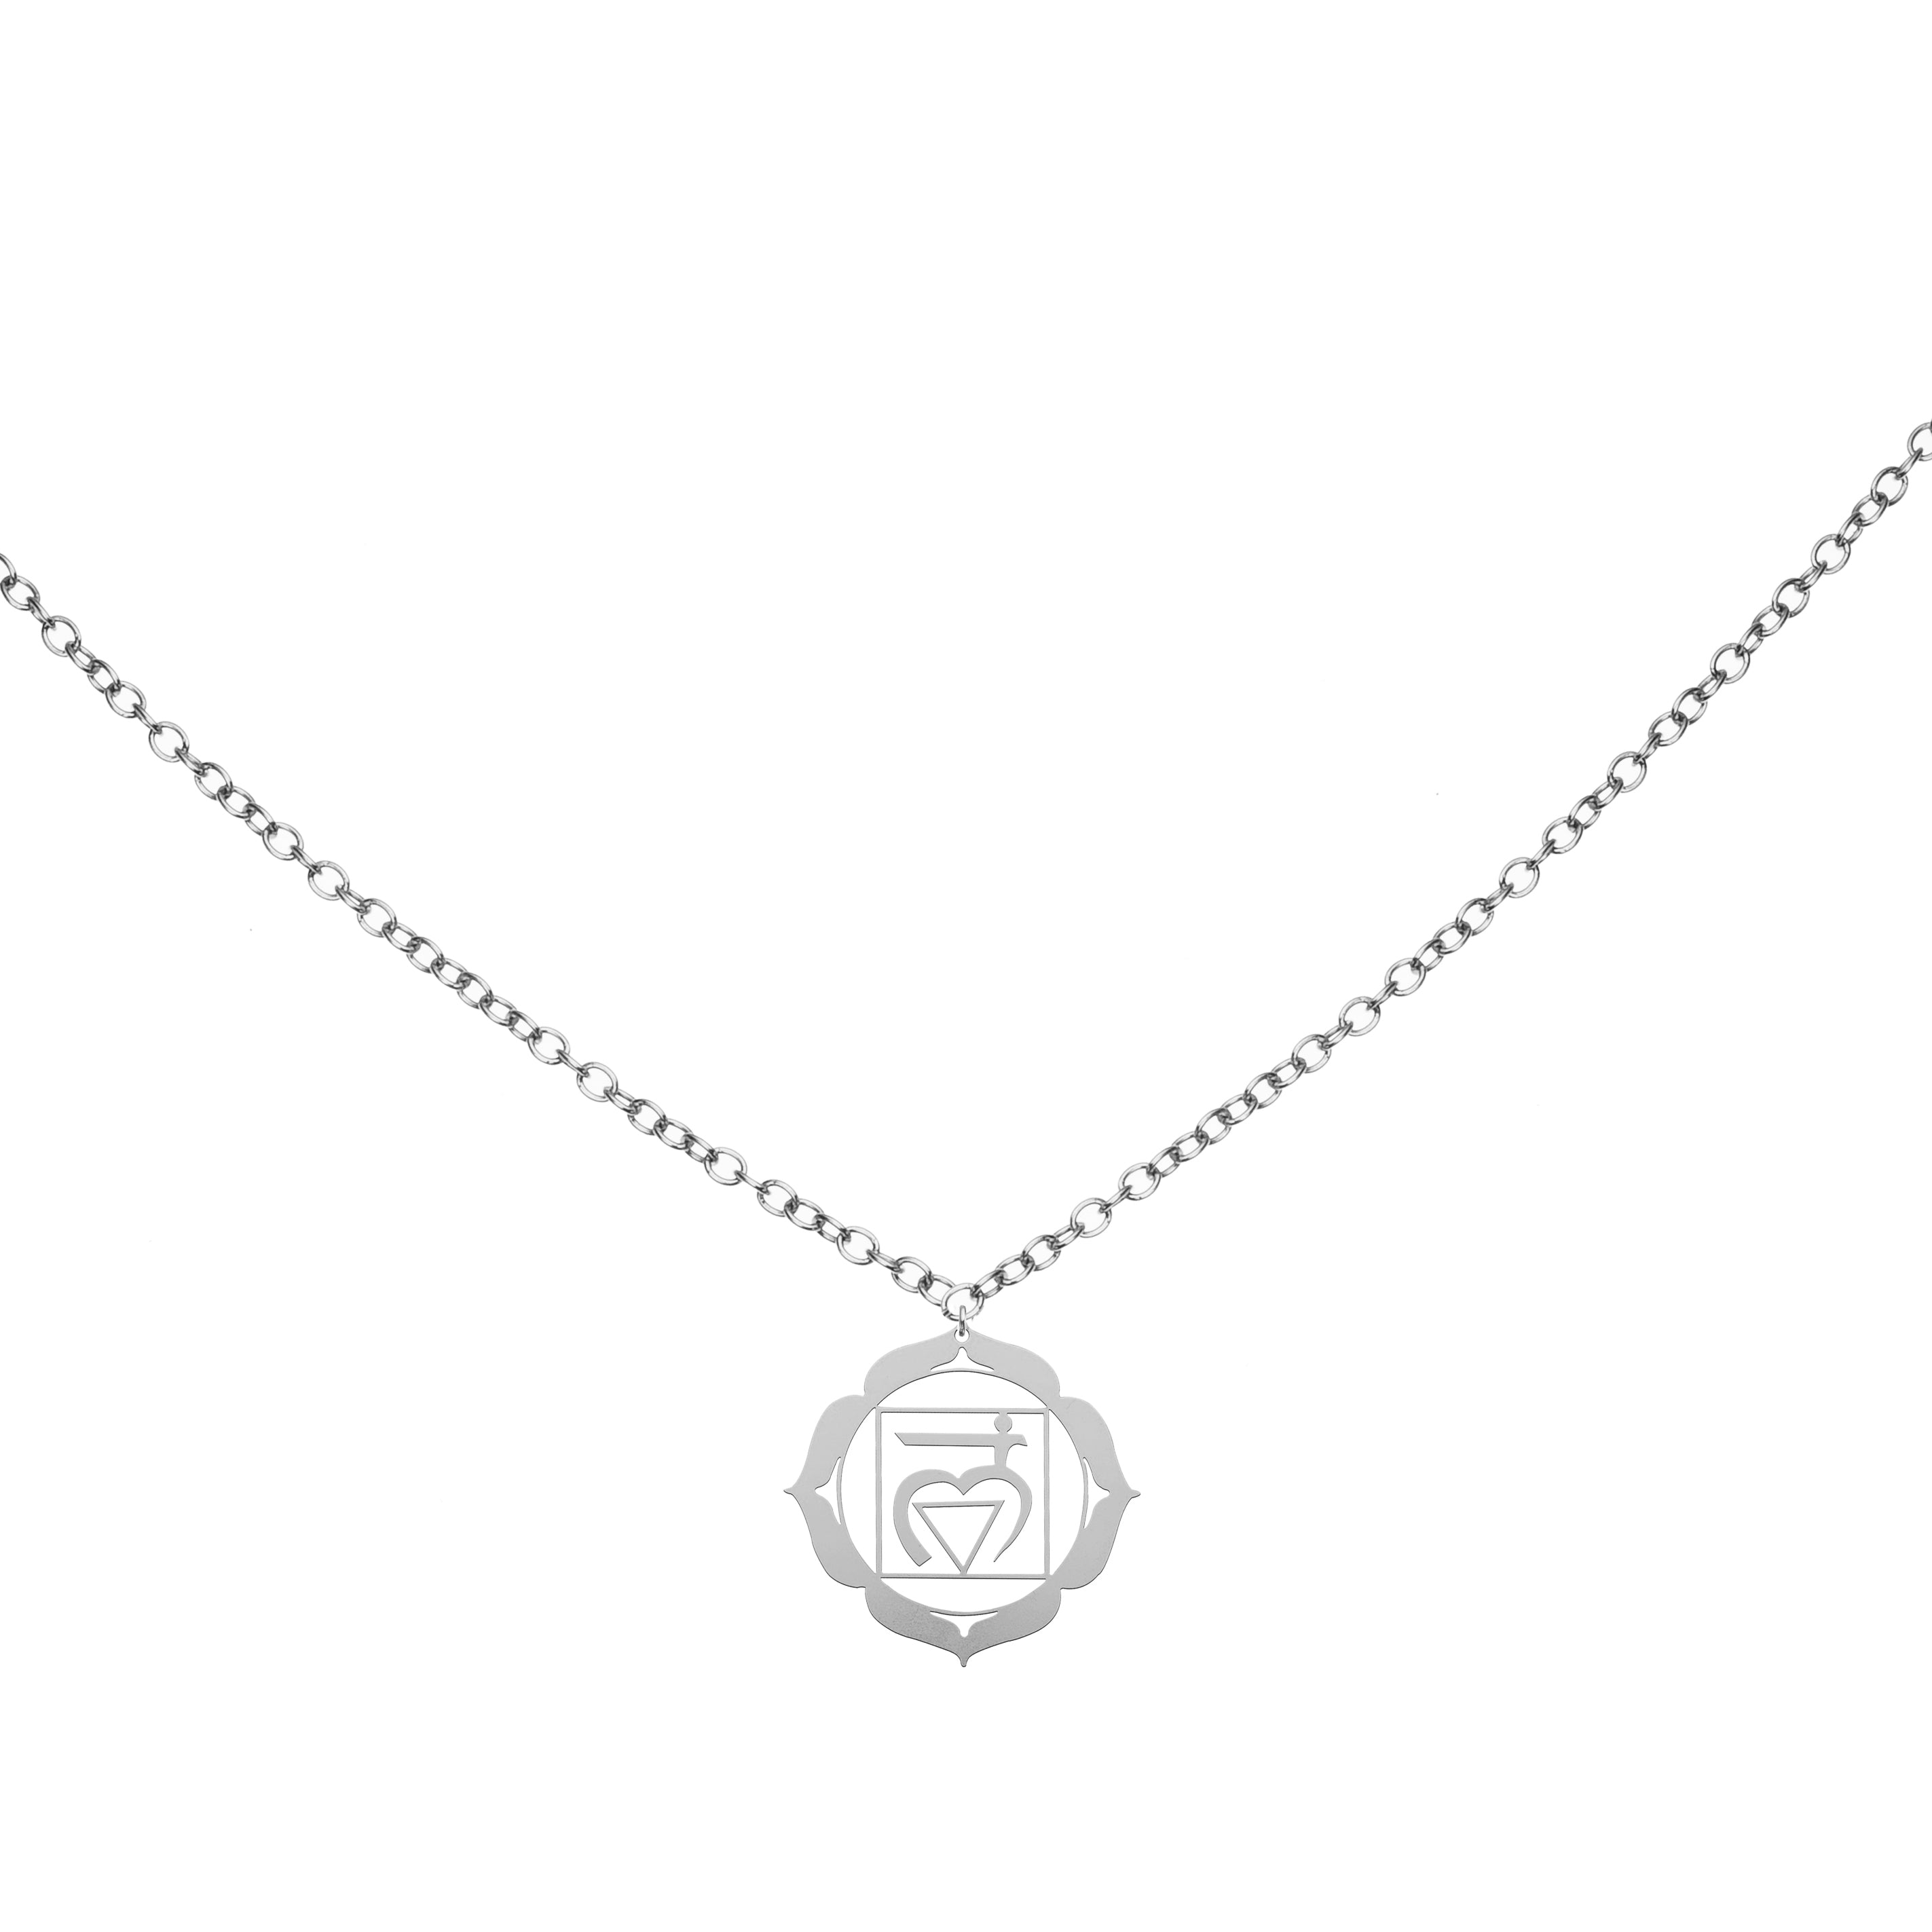 Root Chakra Necklace | The Root Chakra represents security